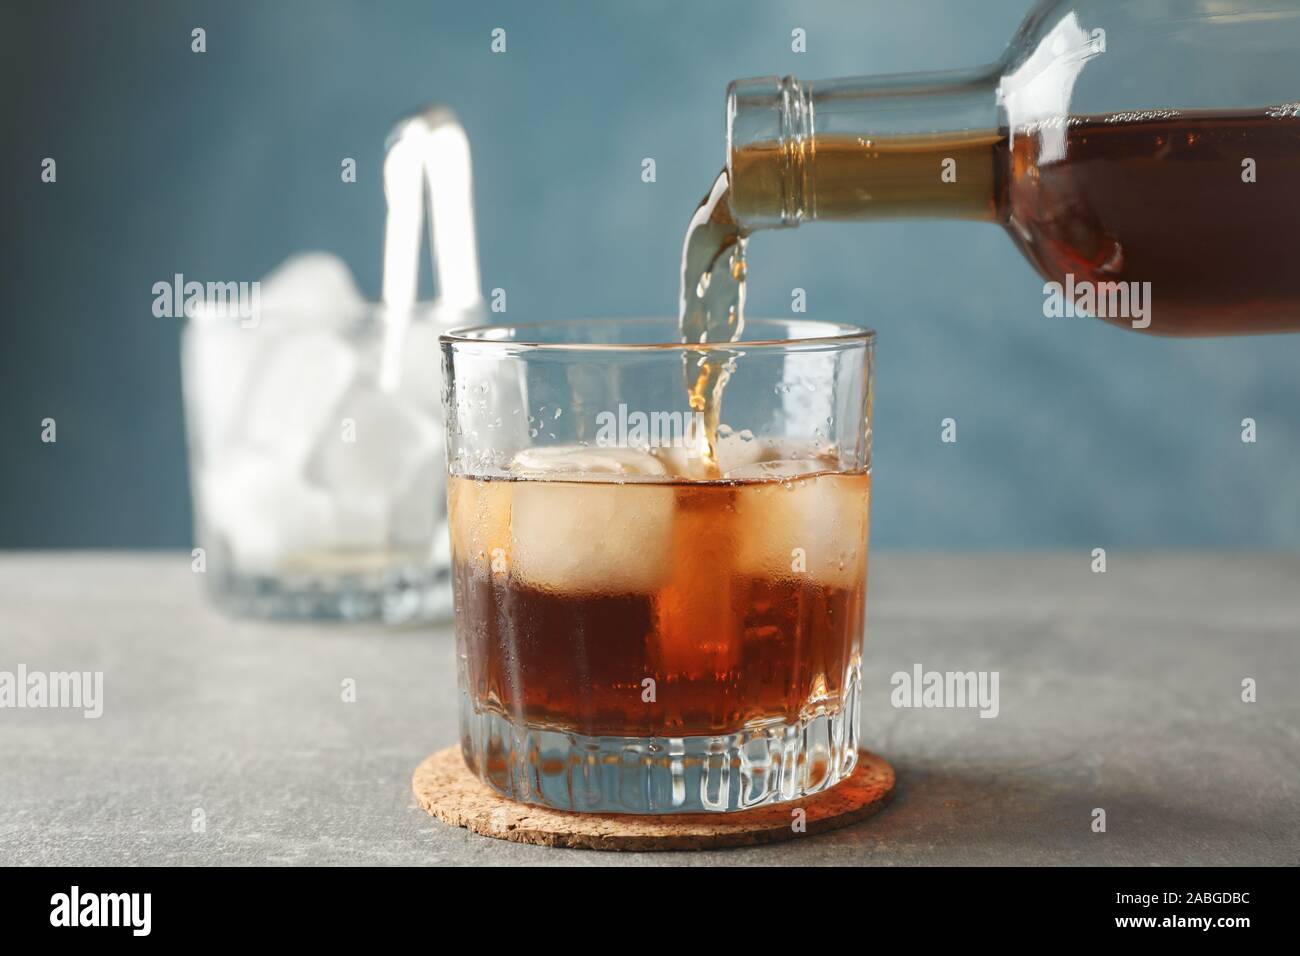 Bottle, glass of whiskey and ice cubes on grey background, close up Stock Photo